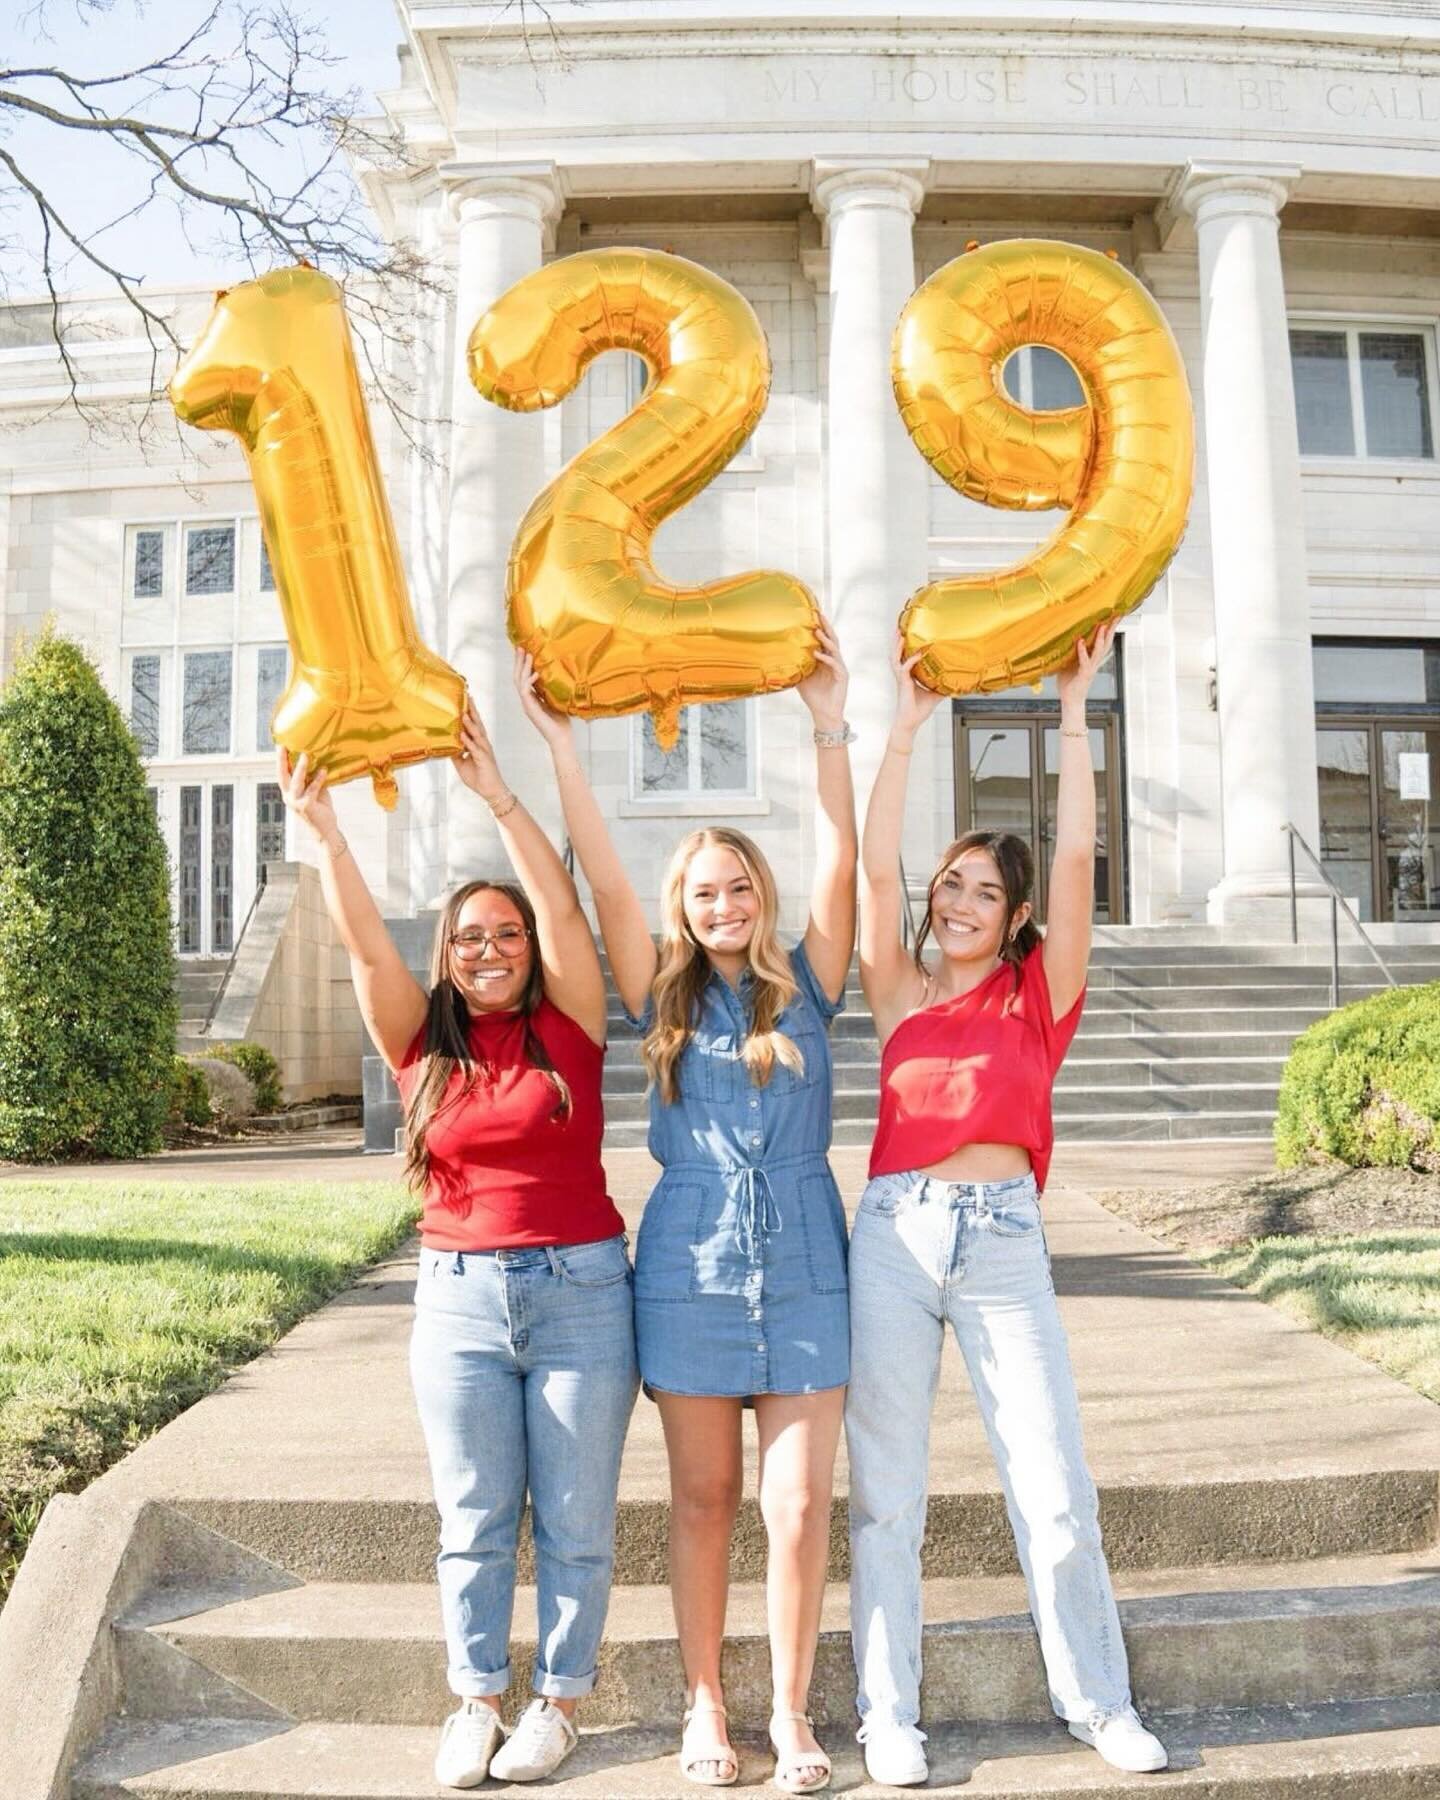 On April 5th, 129 years ago, Chi Omega was established at the University of Arkansas by four young women and one dentist. For 129 years, our Sisterhood has united women, forged friendships, and fostered community. 
 
Today, we continue to support our